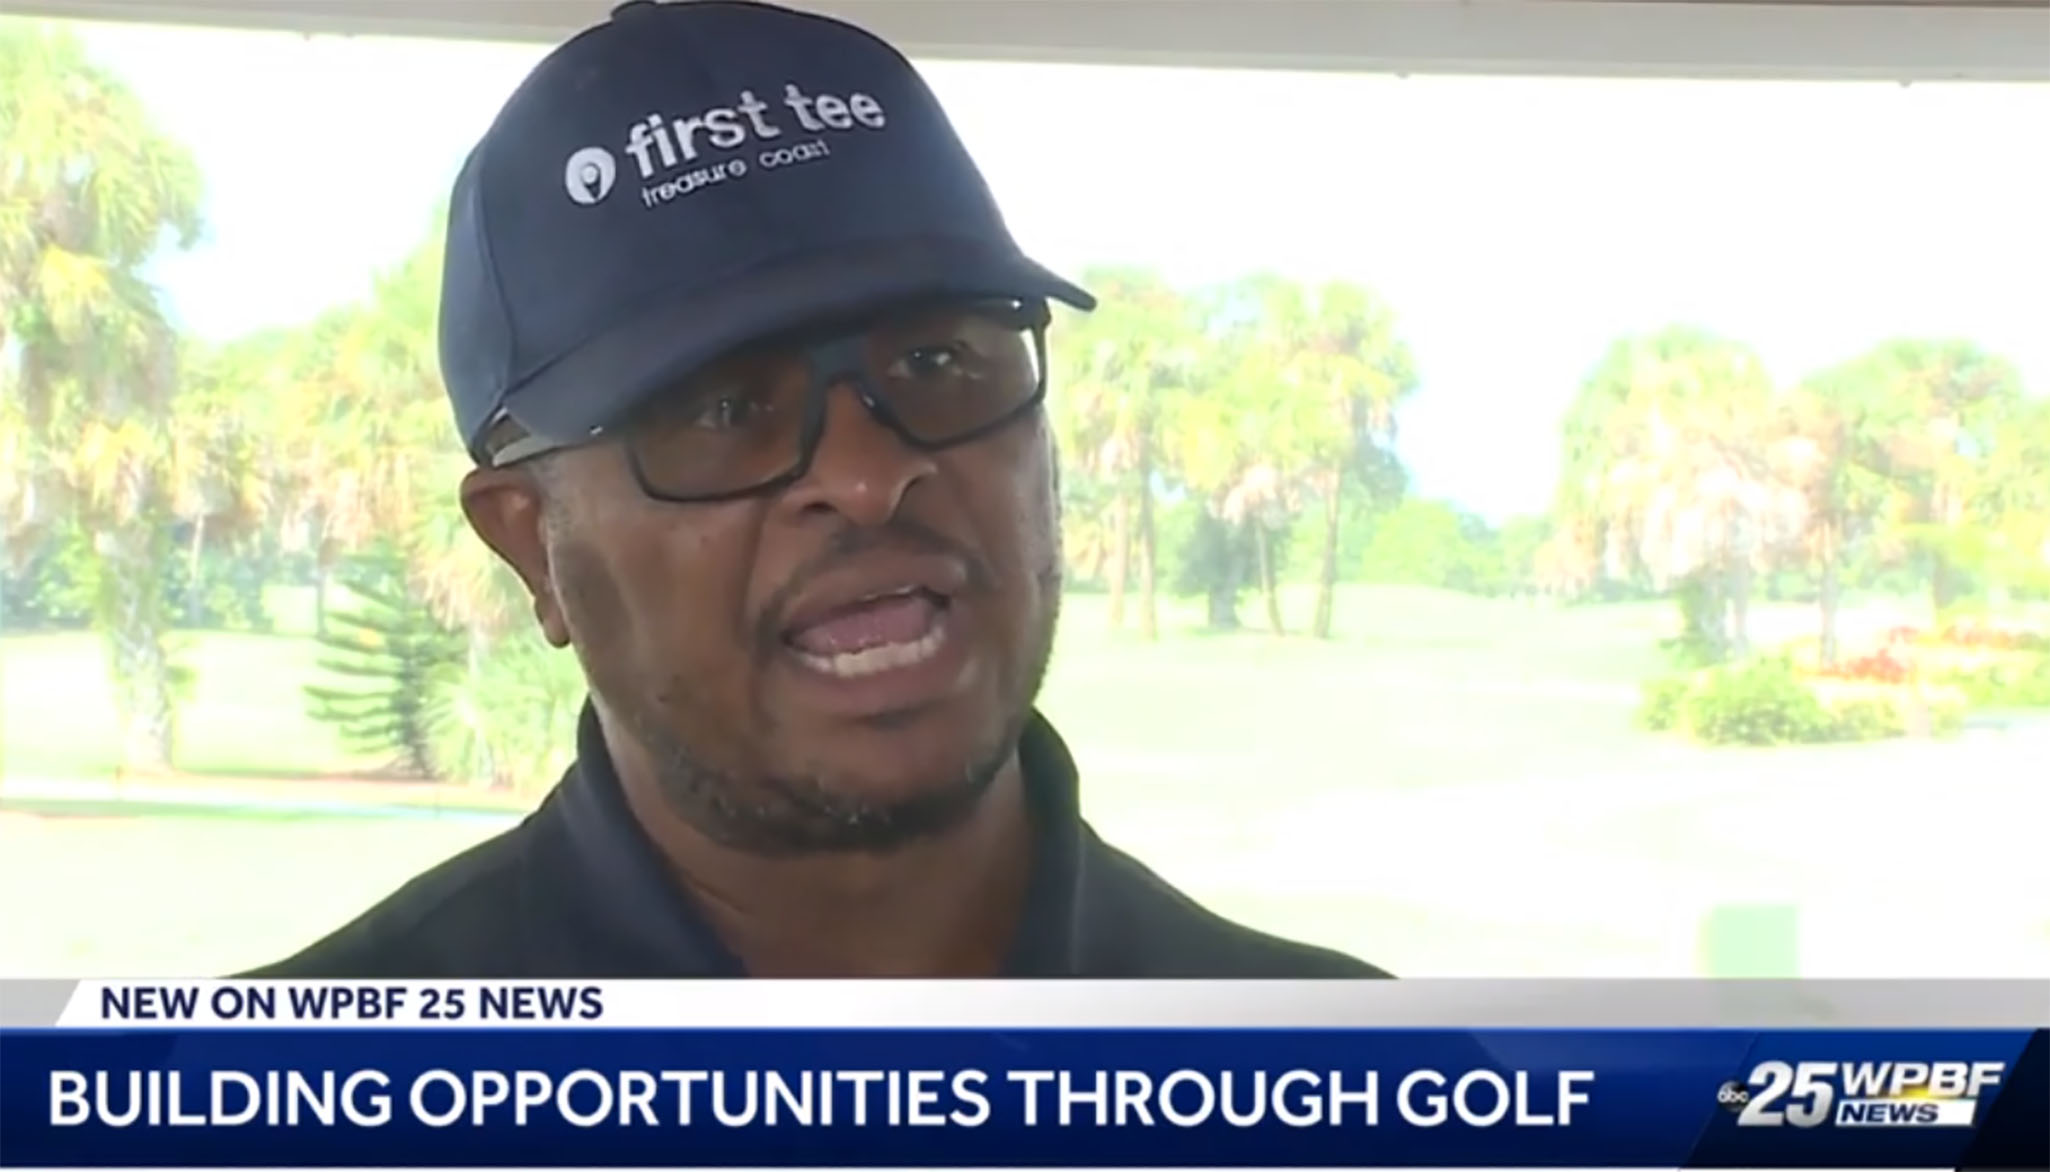 Keiser University College of Golf Graduate Shares Details of Nonprofit with ABC Viewers